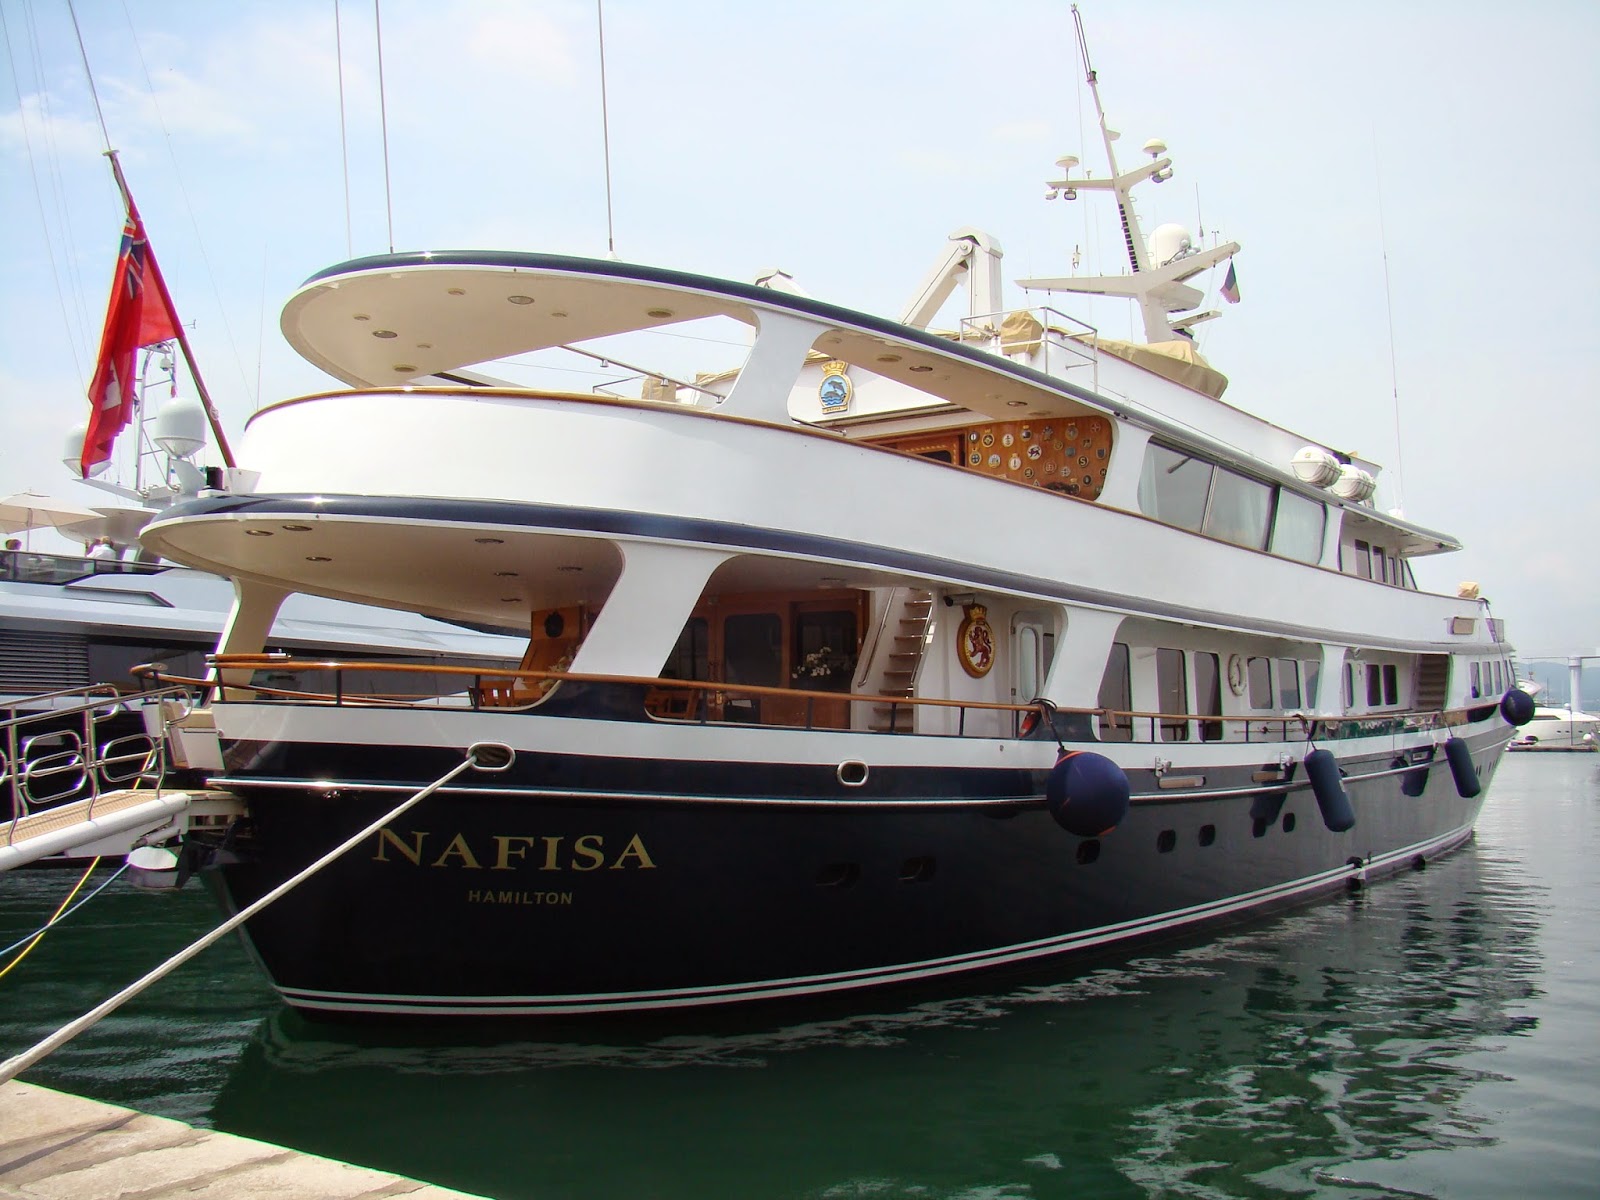 Superyacht Nafisa, owned by Mohammed Abdul Latif Jameel